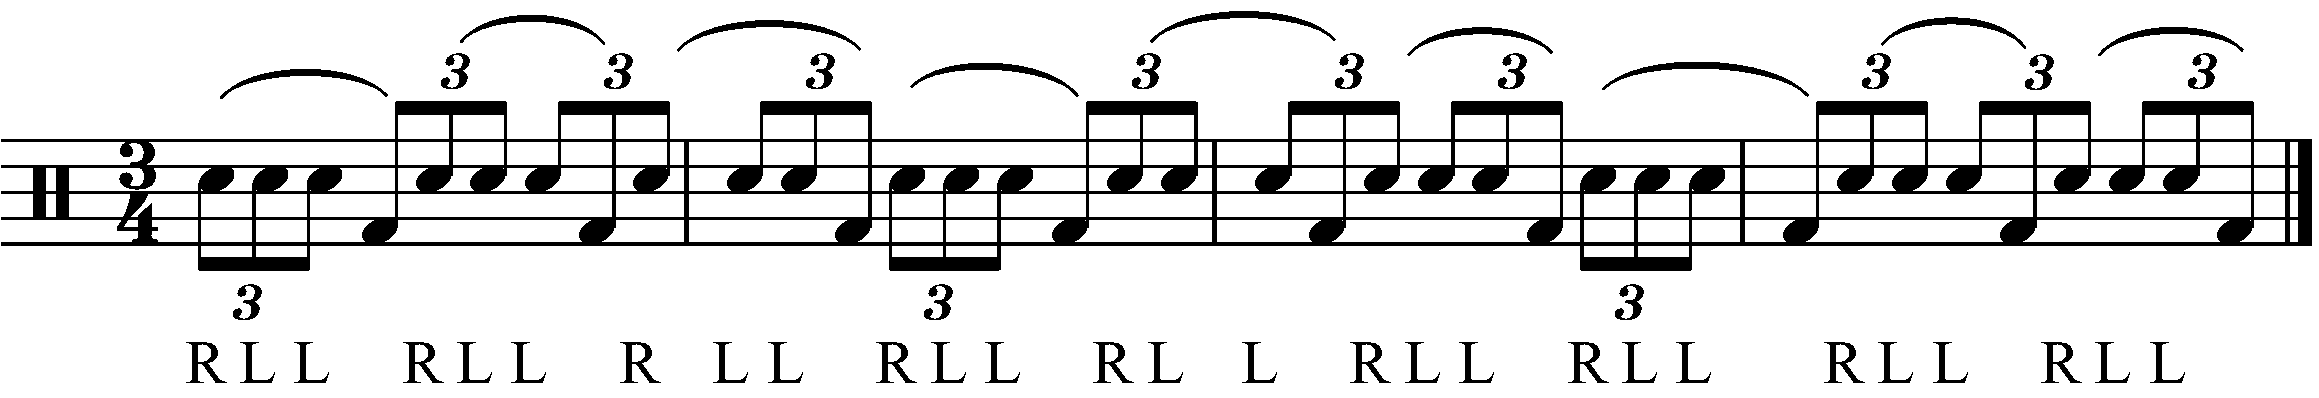 The RLLF exercise played over triplets in 3/4.